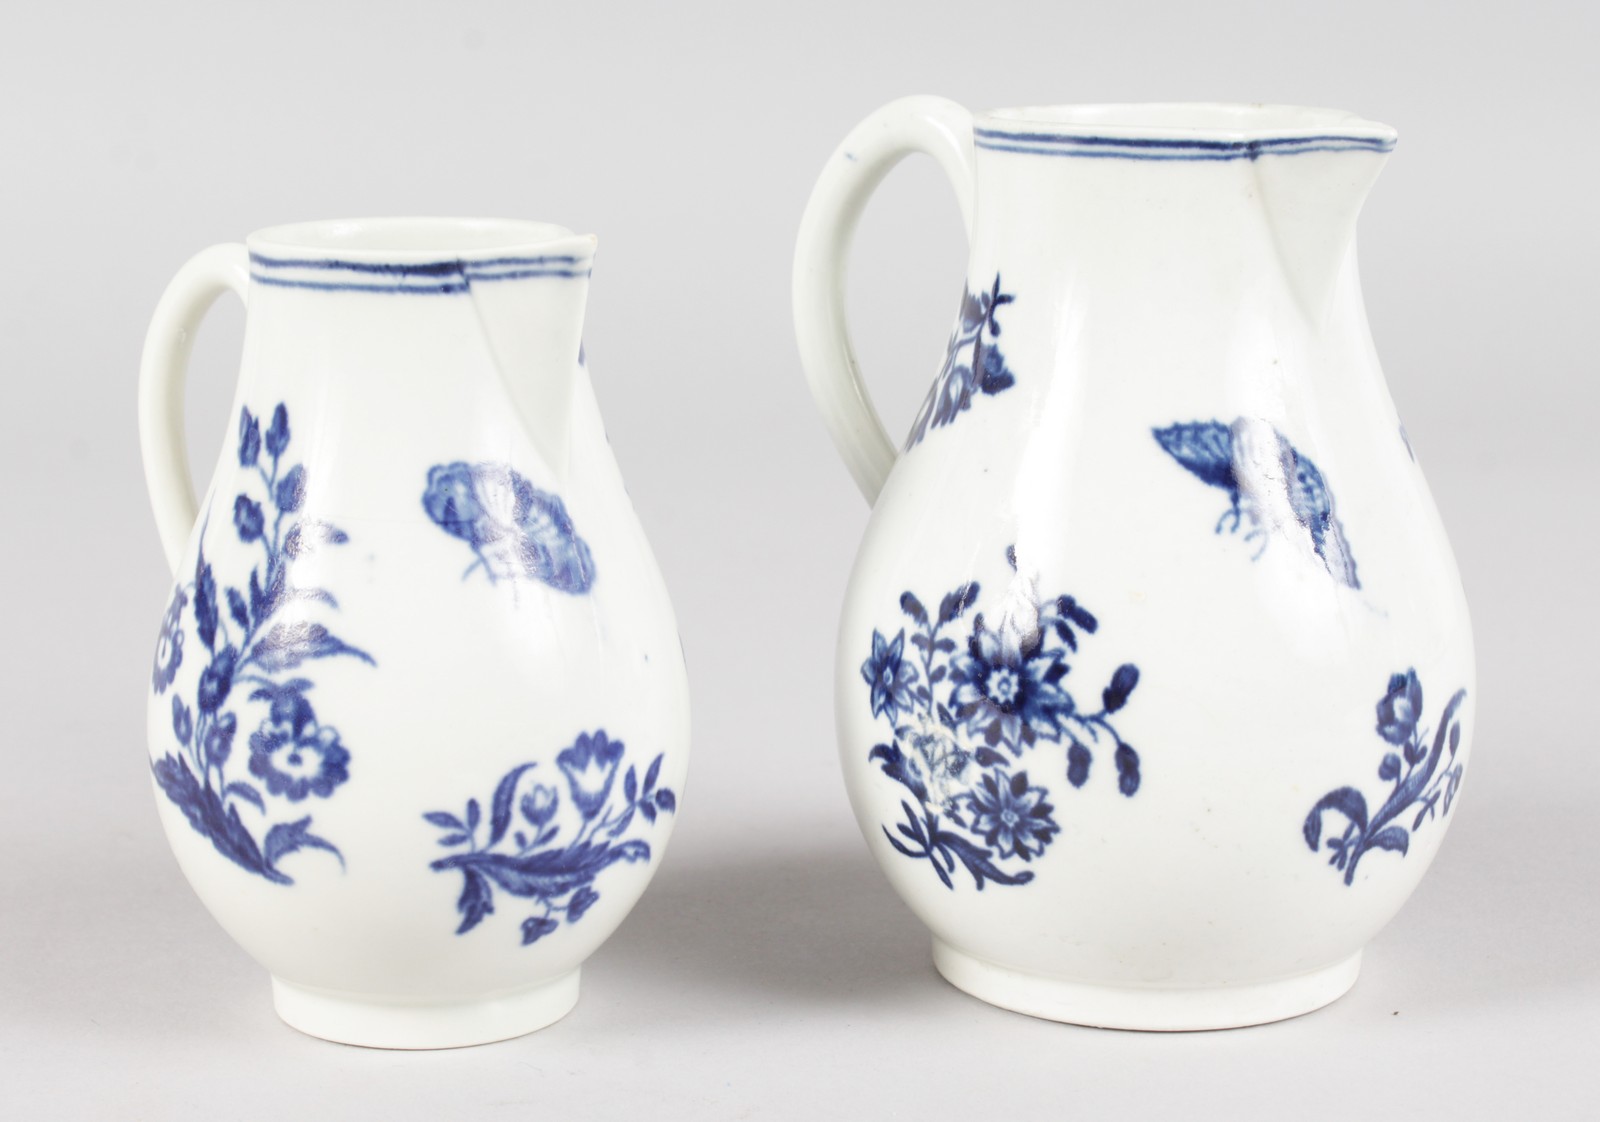 AN 18TH CENTURY WORCESTER SPARROW BEAK JUG, printed with the Three Flowers pattern in underglaze